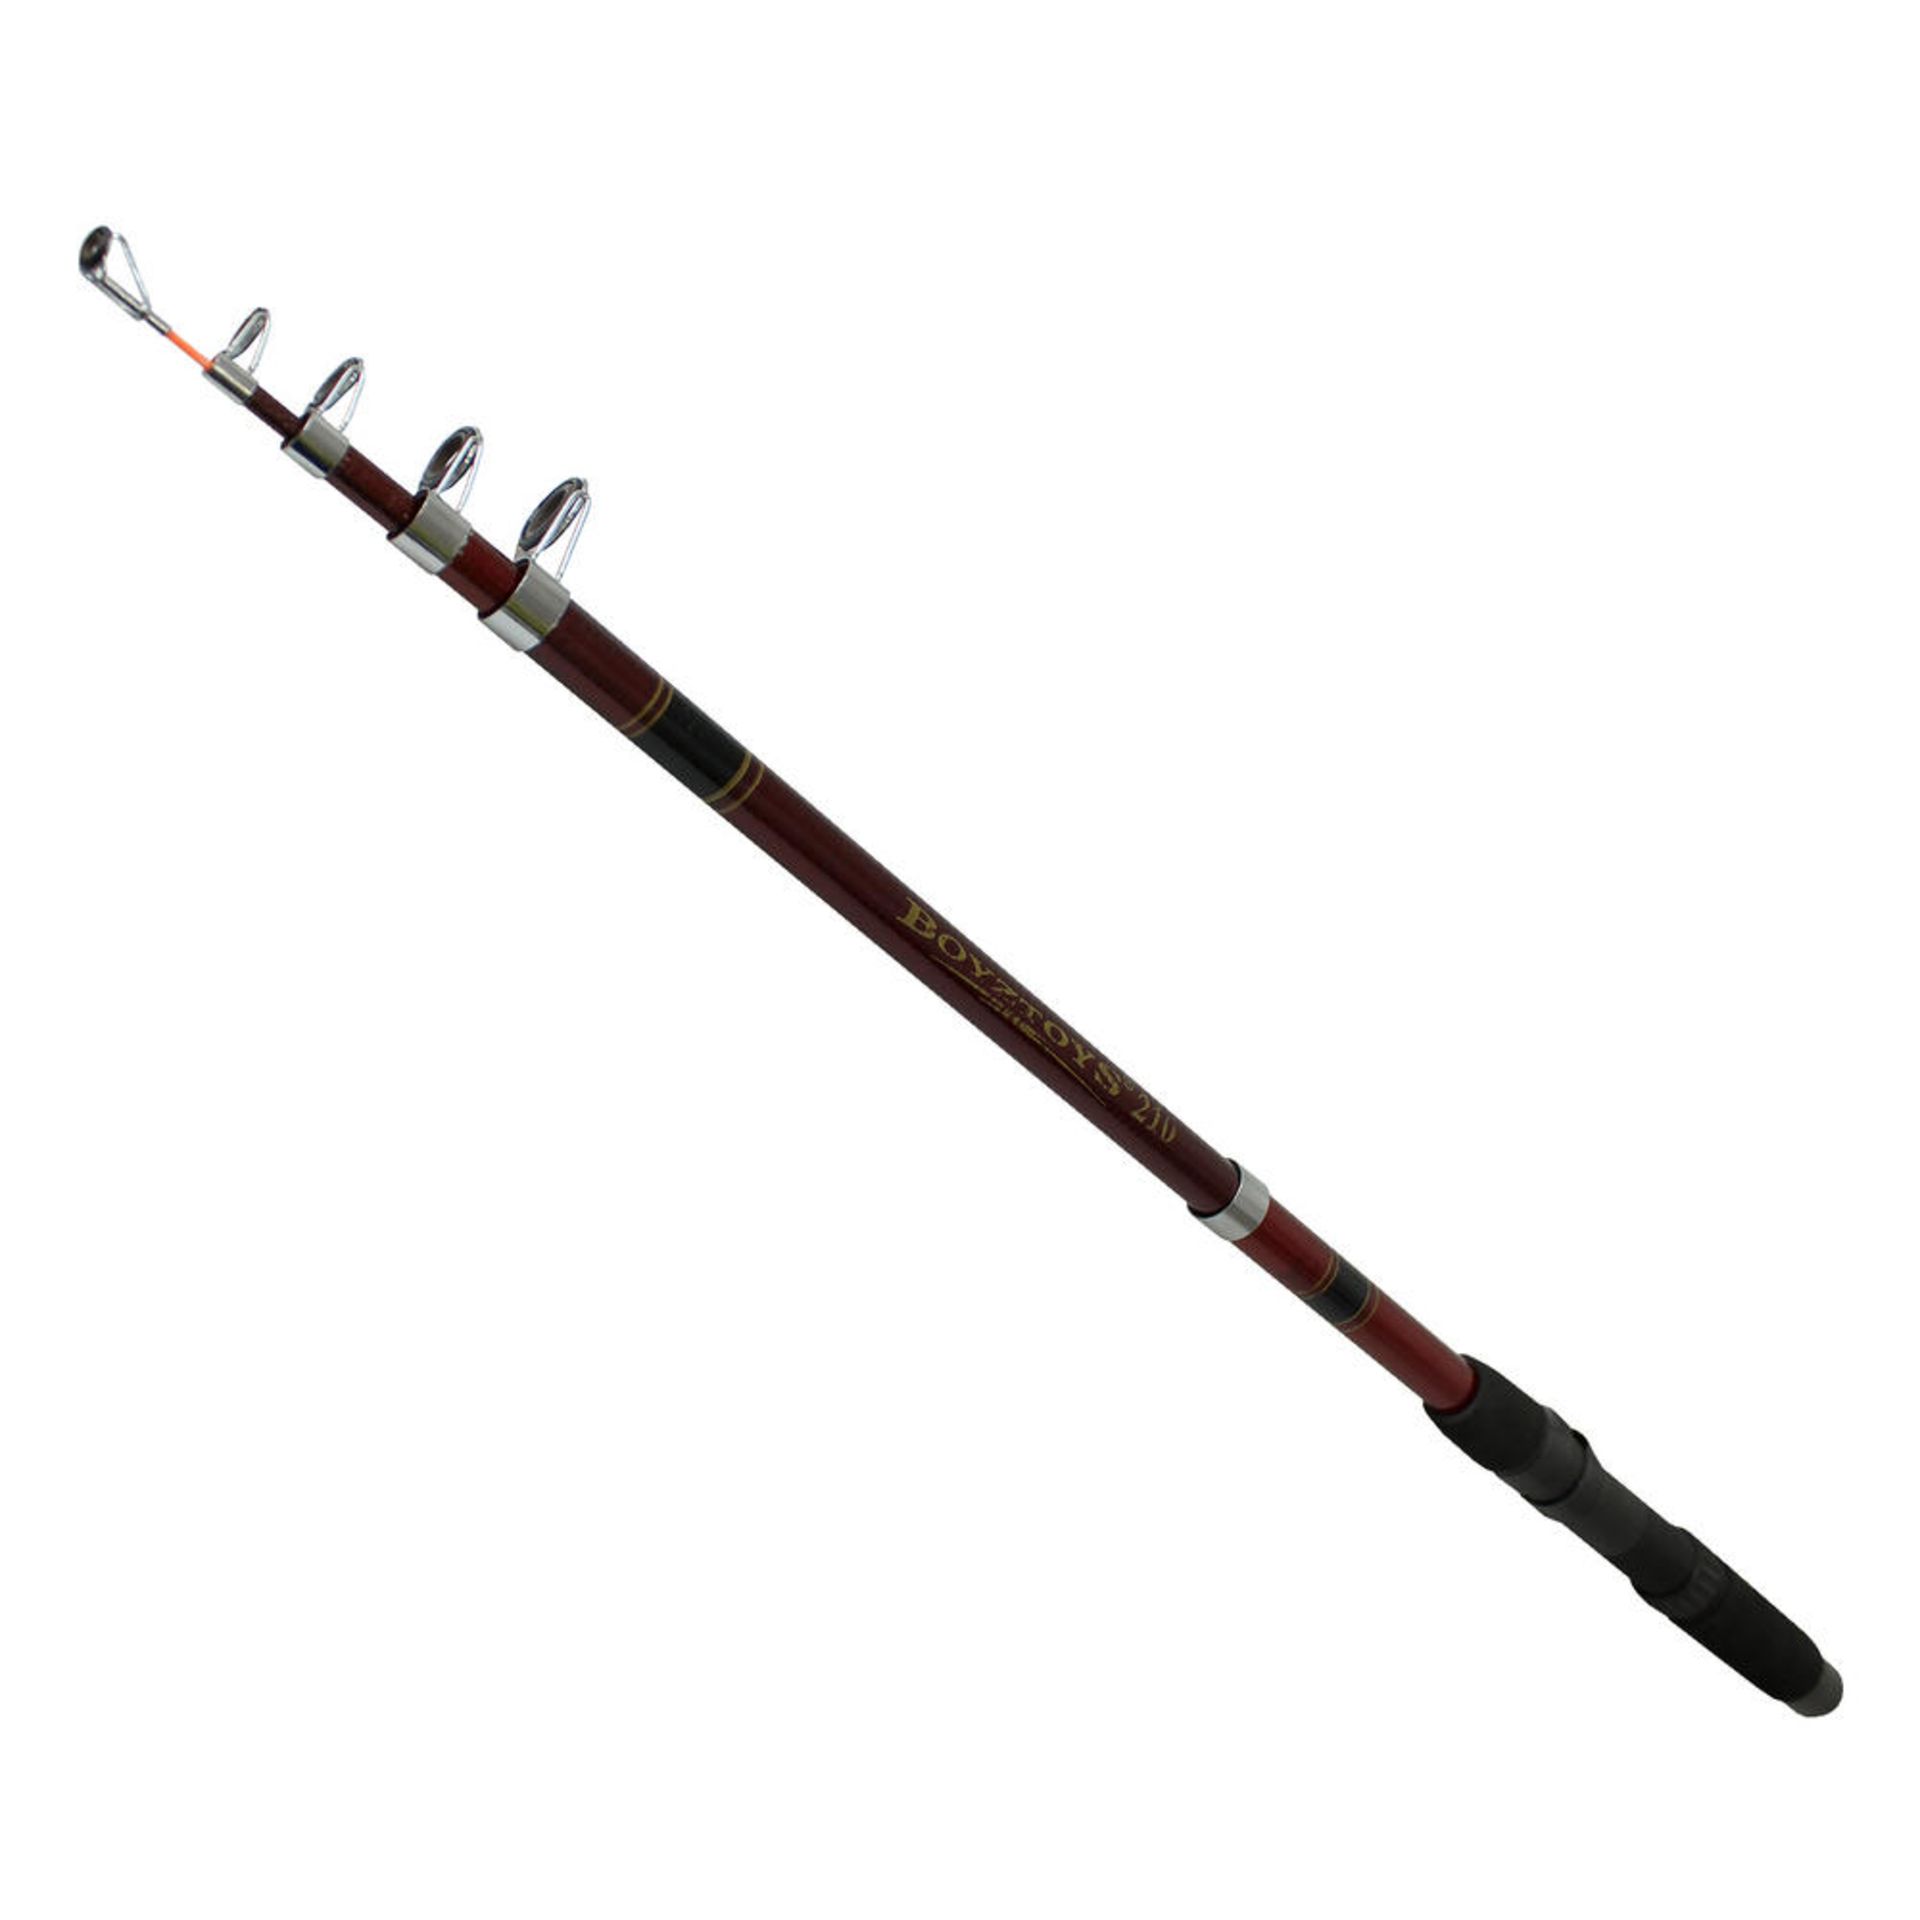 V Brand New 2m Telescopic Fishing Rod - Soft Grip Handle - Ideal For Most Kinds of Fishing